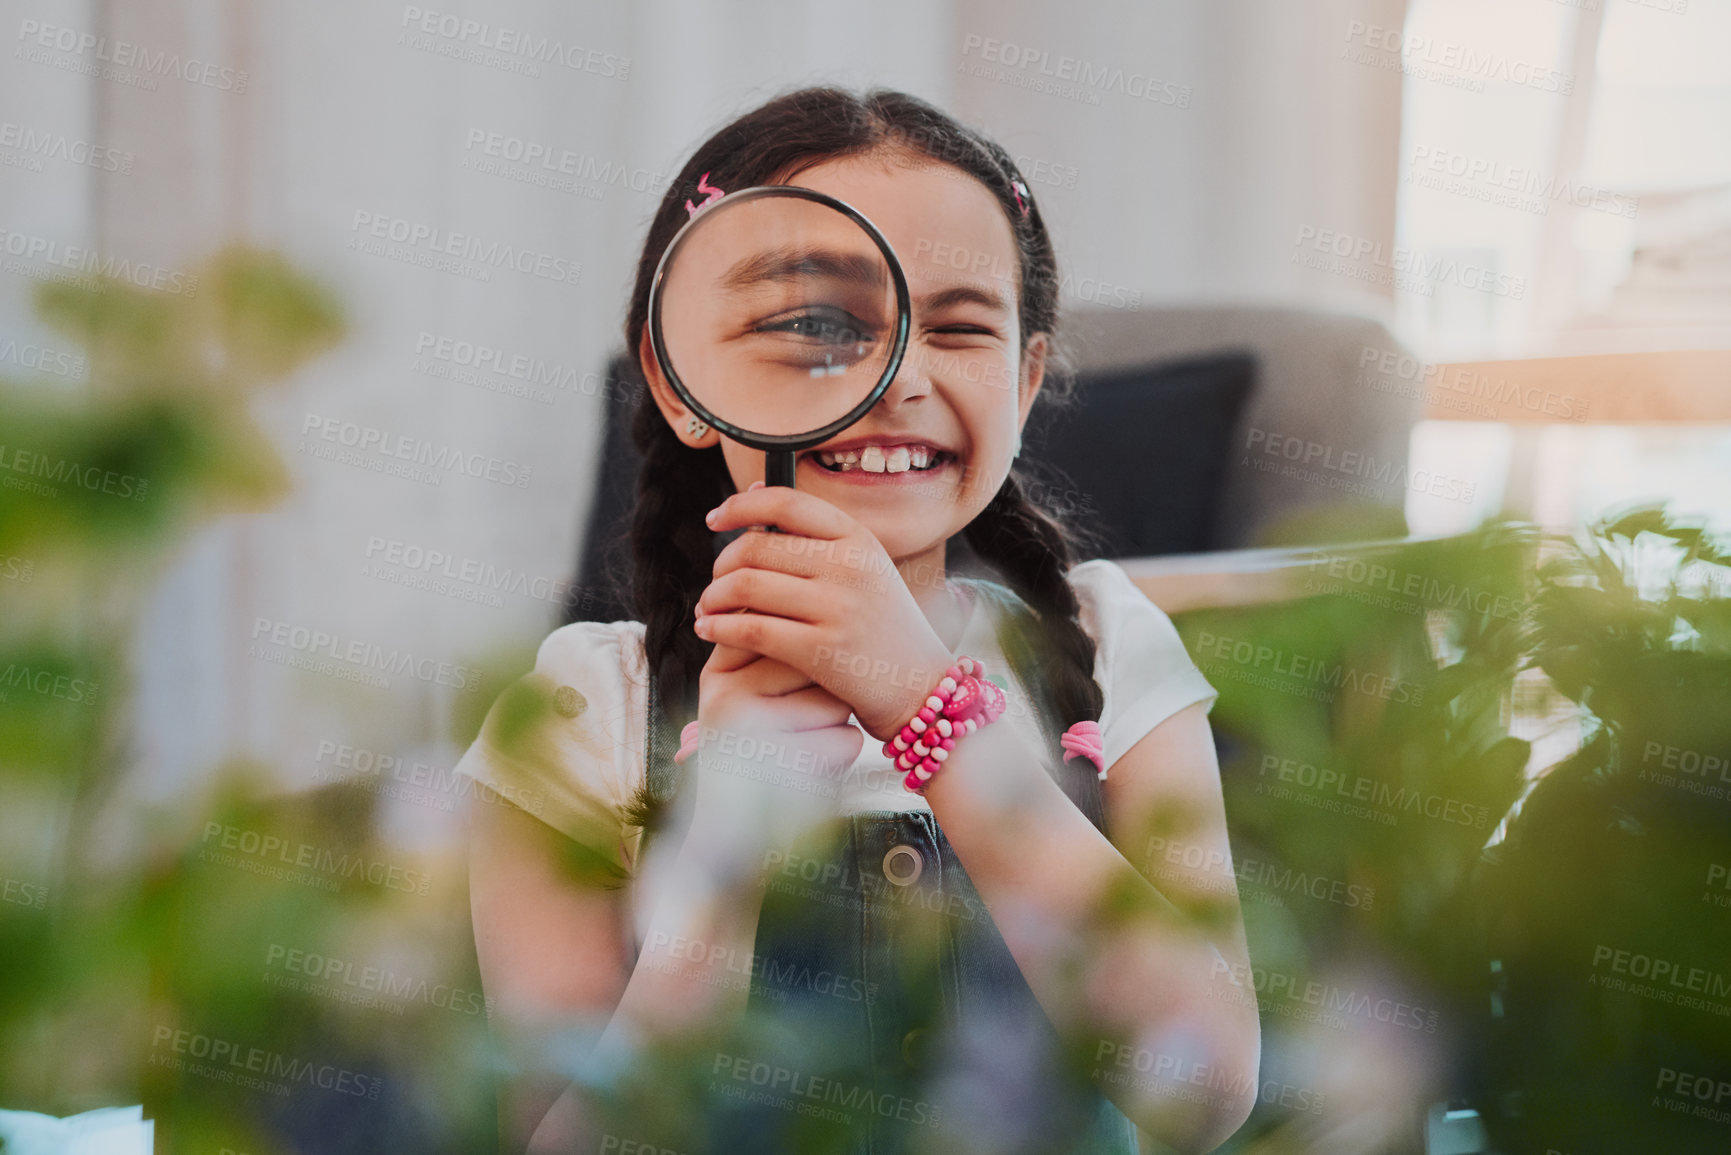 Buy stock photo Cropped portrait of an adorable little girl smiling while looking through a magnifying glass at home